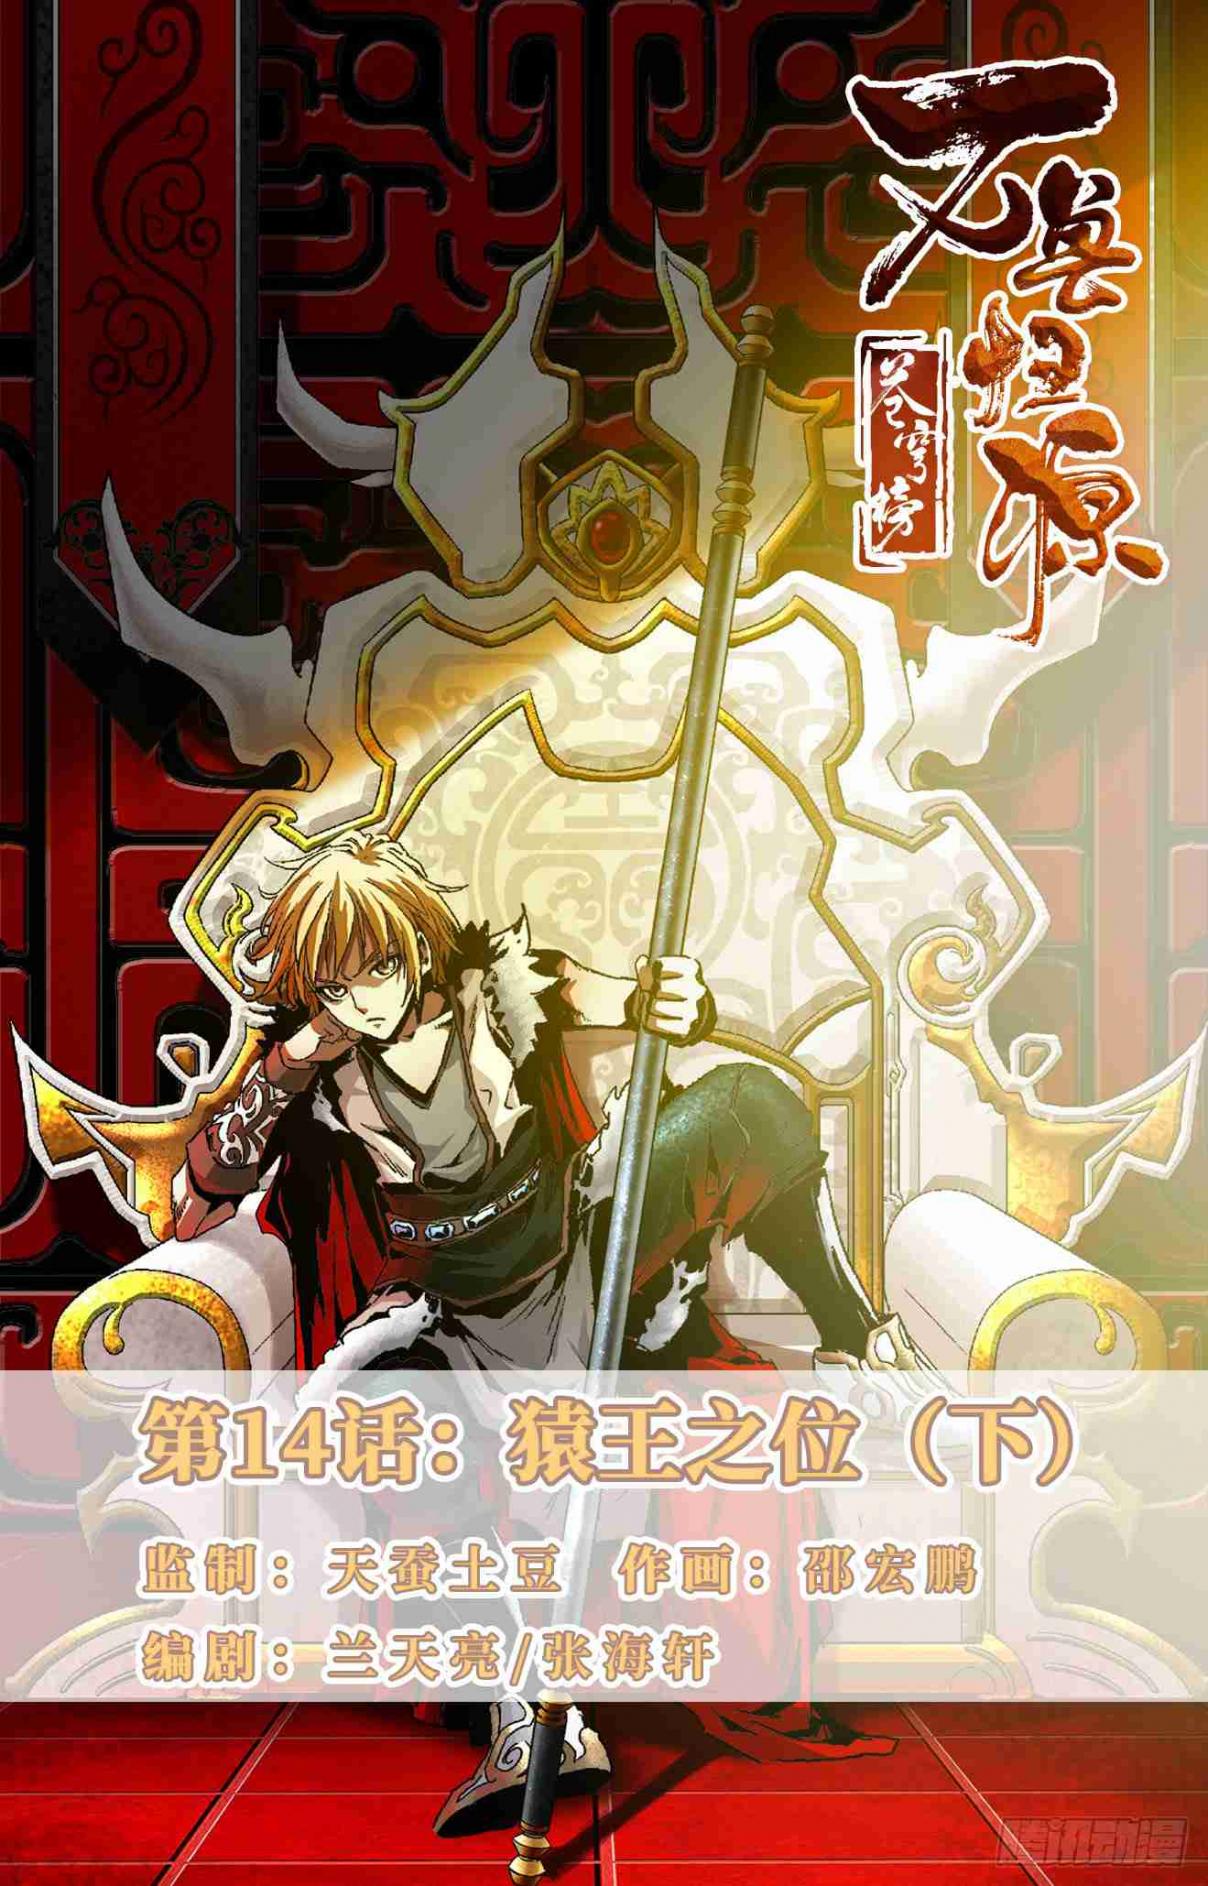 Fights Break Sphere – Return of The Beasts Ch. 14.2 Throne of the Ape King